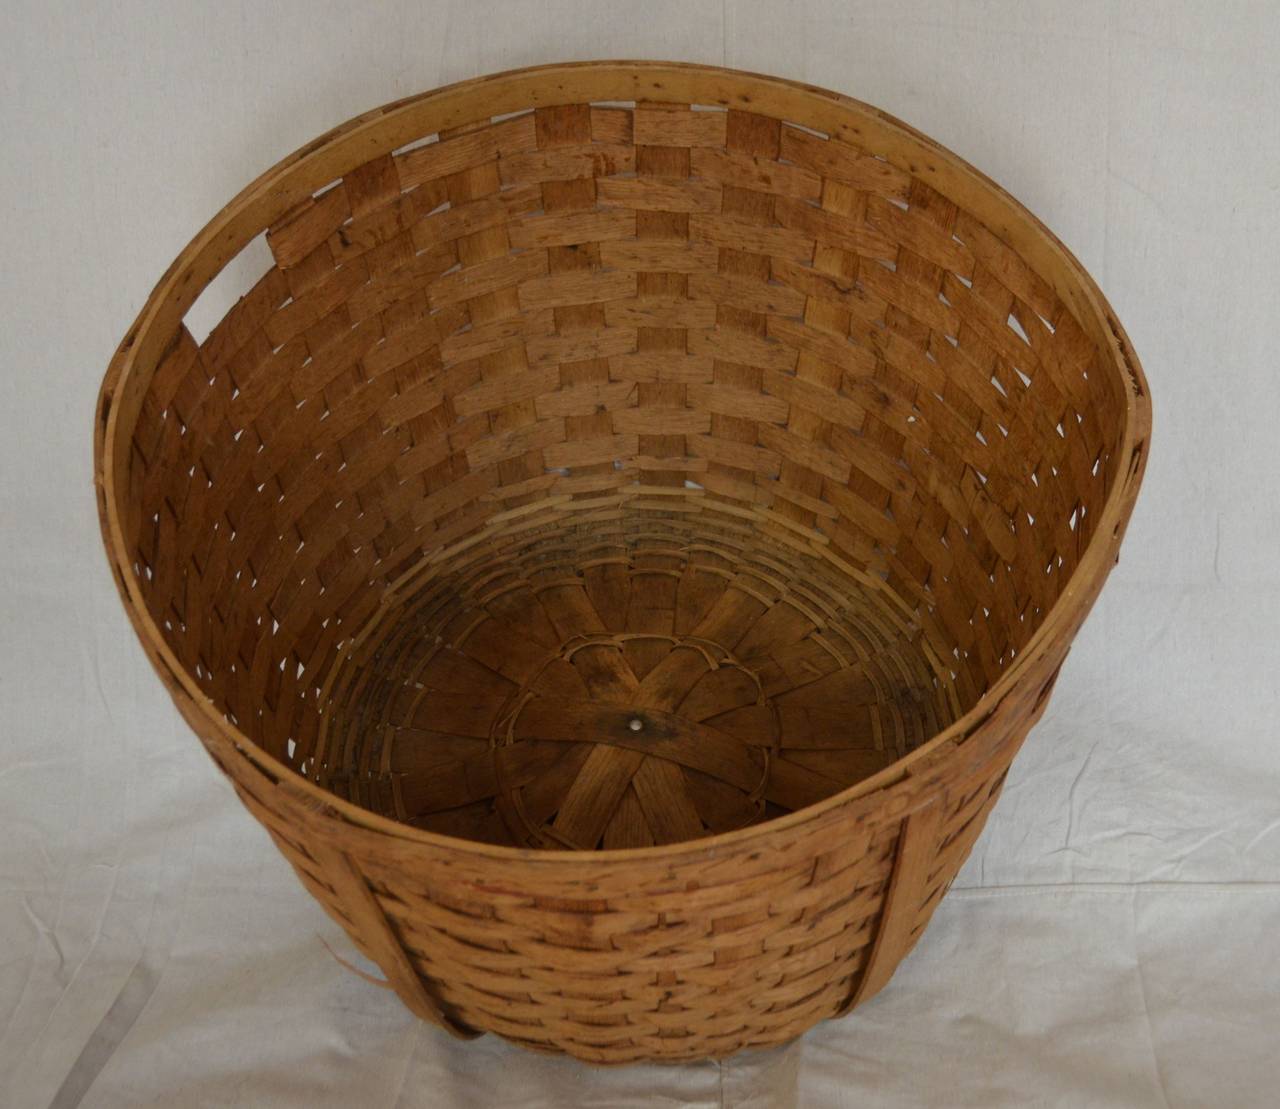 Large-size, round vintage basket of woven wooden slats and cut-out handles.  Aesthetically-pleasing circular design in soft, honey-colored hues provides versatile storage capacity in bedroom, bath, laundry room, for kids' room toys.